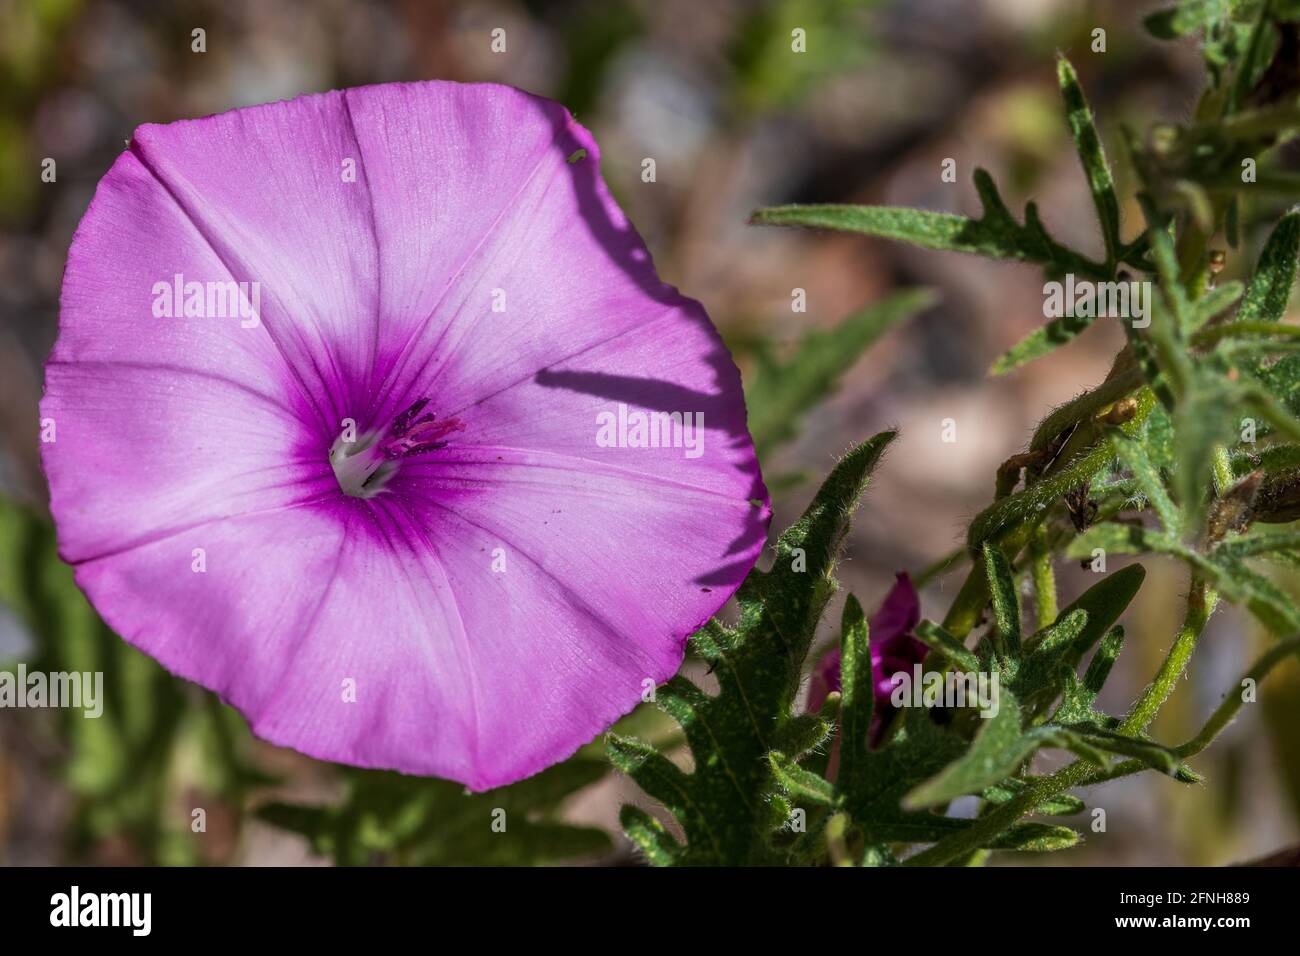 Convolvulus althaeoides, Malve-leaved bindweed Pflanze in Blume Stockfoto